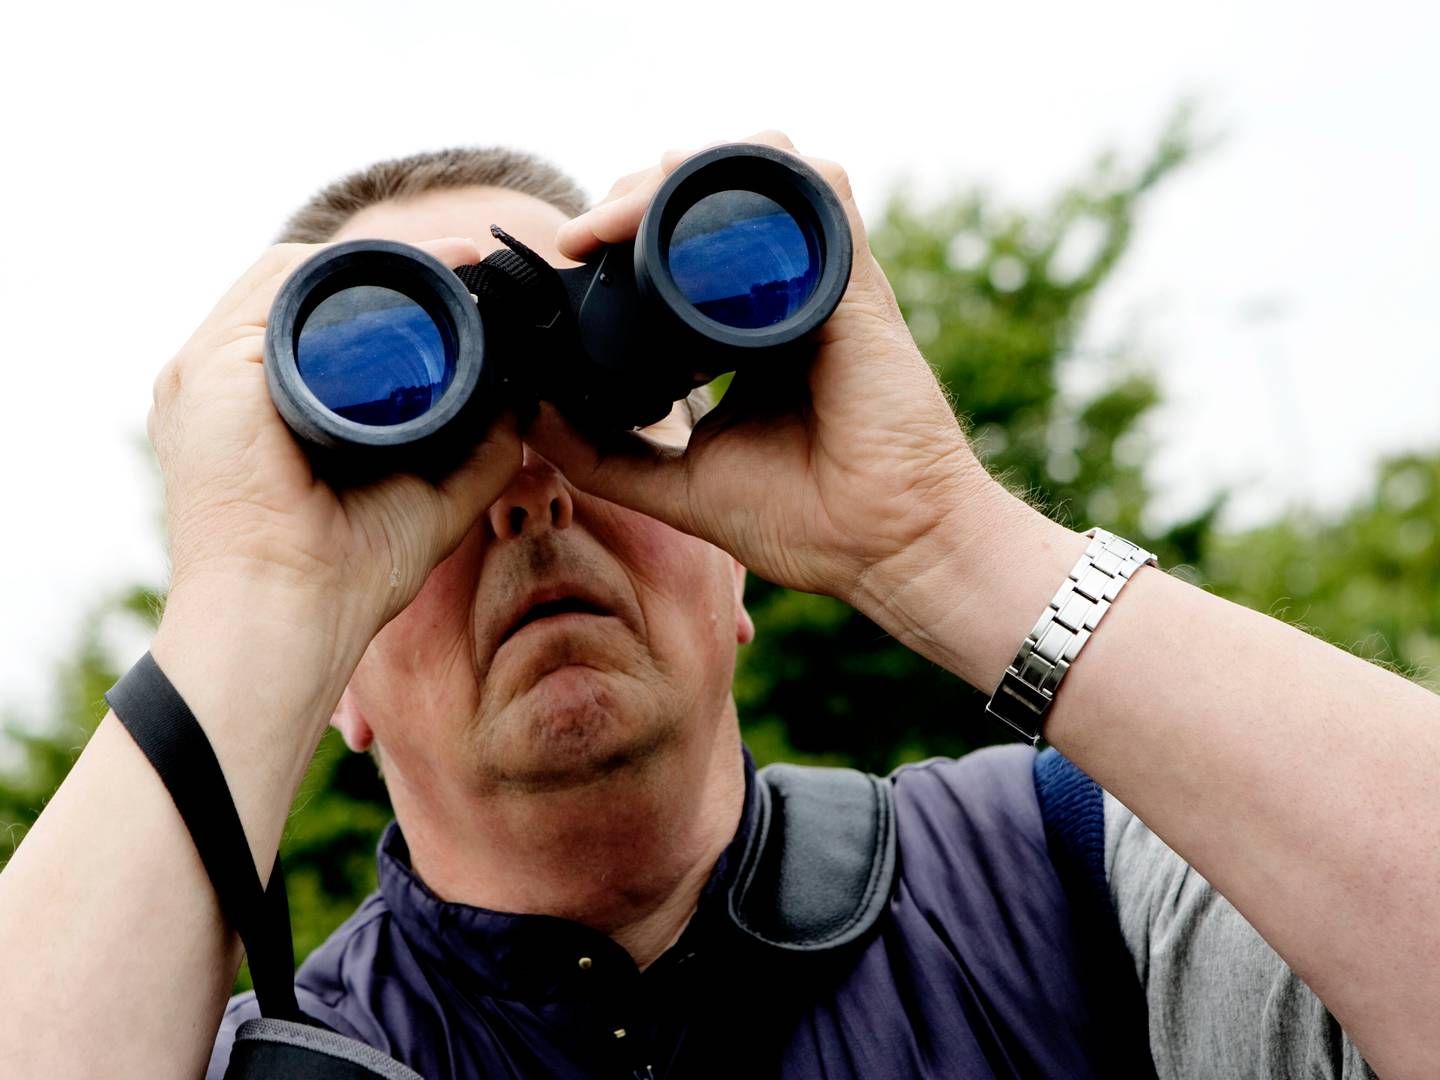 A Nordic investor is on the lookout for one or more equity managers. | Foto: Thomas Borberg/Politiken/Ritzau Scanpix